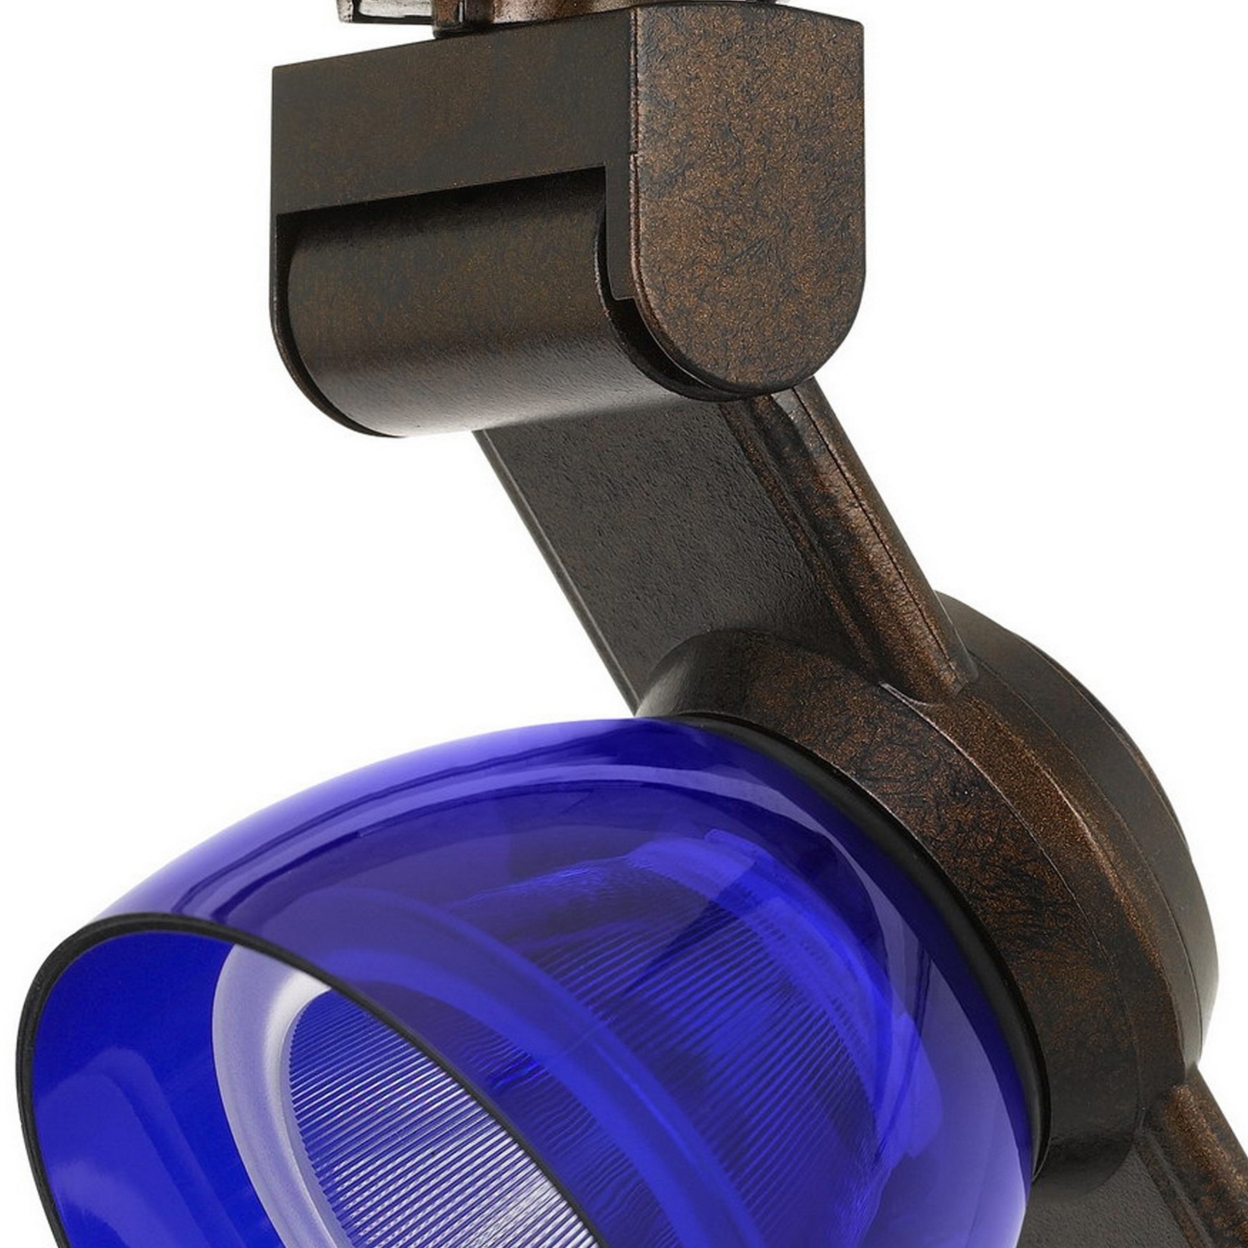 12W Integrated LED Track Fixture With Polycarbonate Head, Bronze And Blue- Saltoro Sherpi